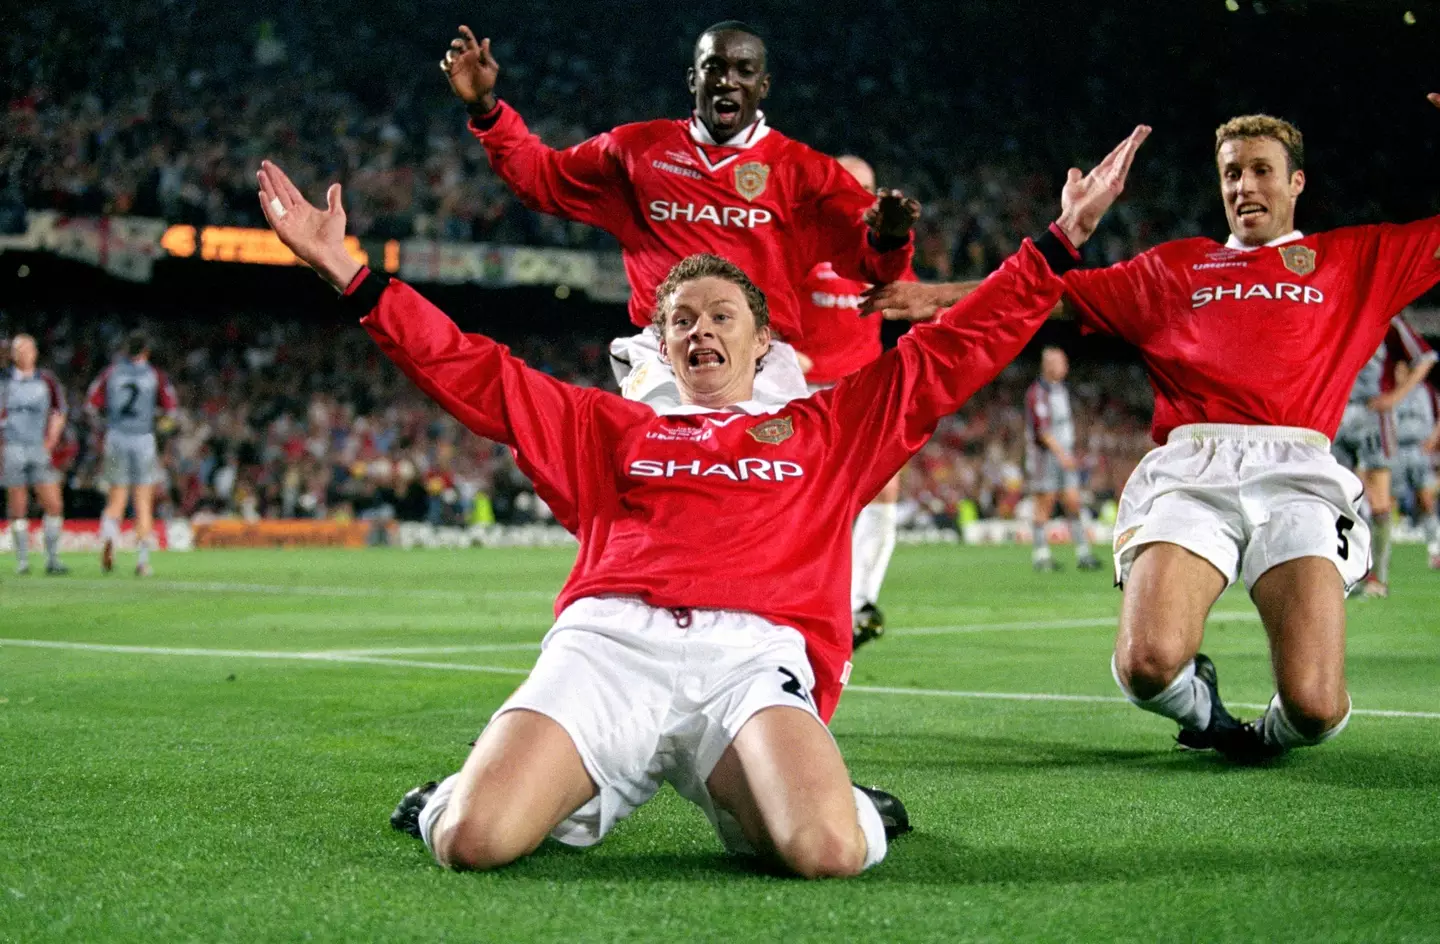 Solskjaer would also enjoy a spell as United manager between 2018 and 2021. (Image